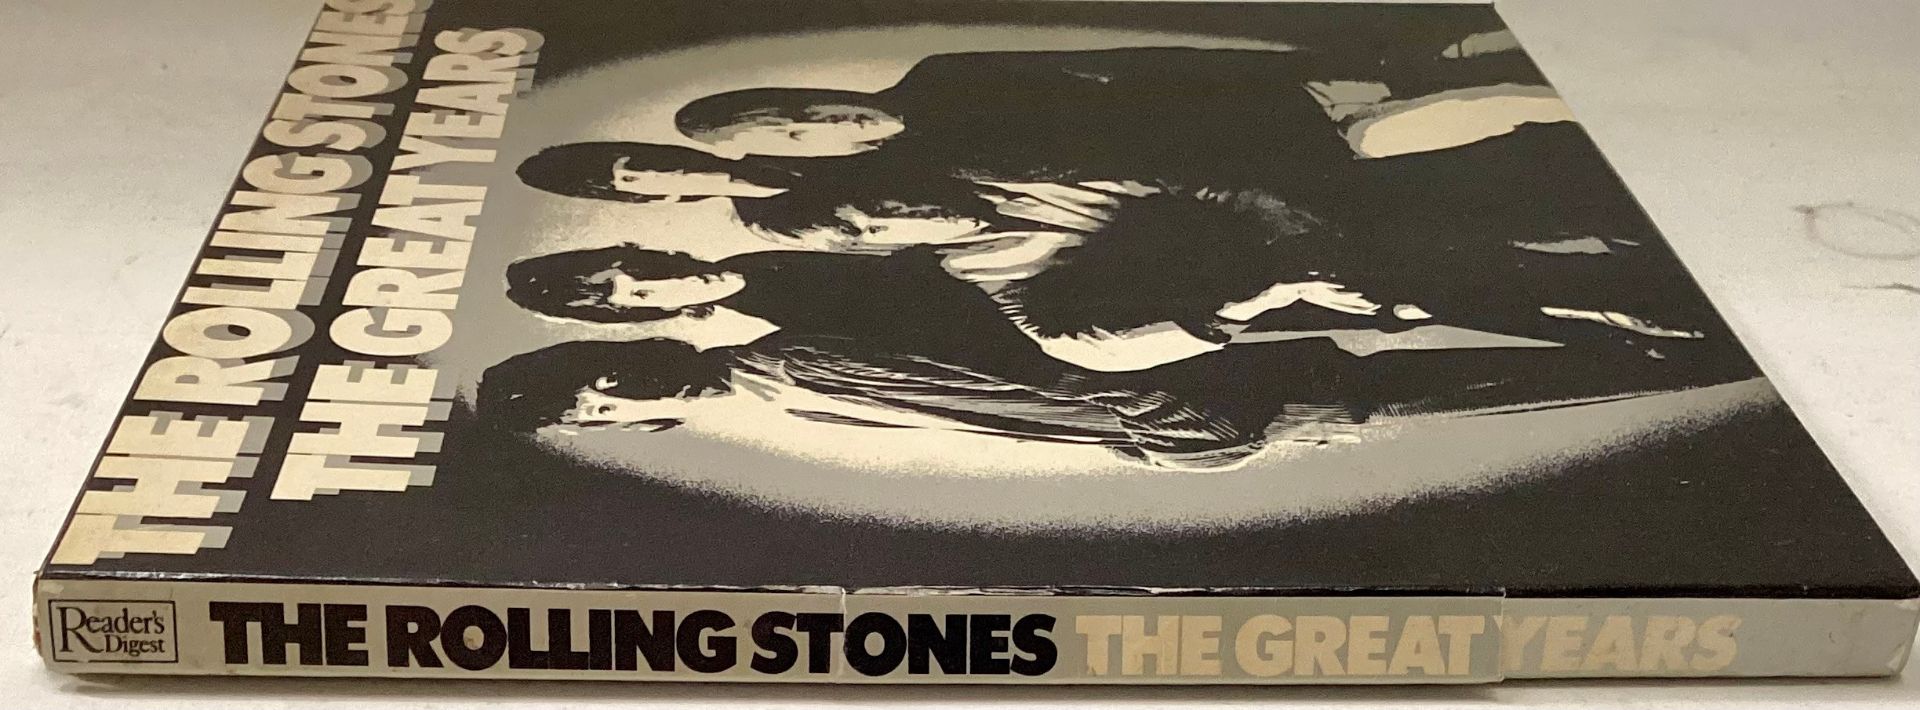 THE ROLLING STONES ‘THE GREAT YEARS” SUPERB 4 LP BOX SET. This is a 4LP BOX SET of The Rolling - Image 2 of 4